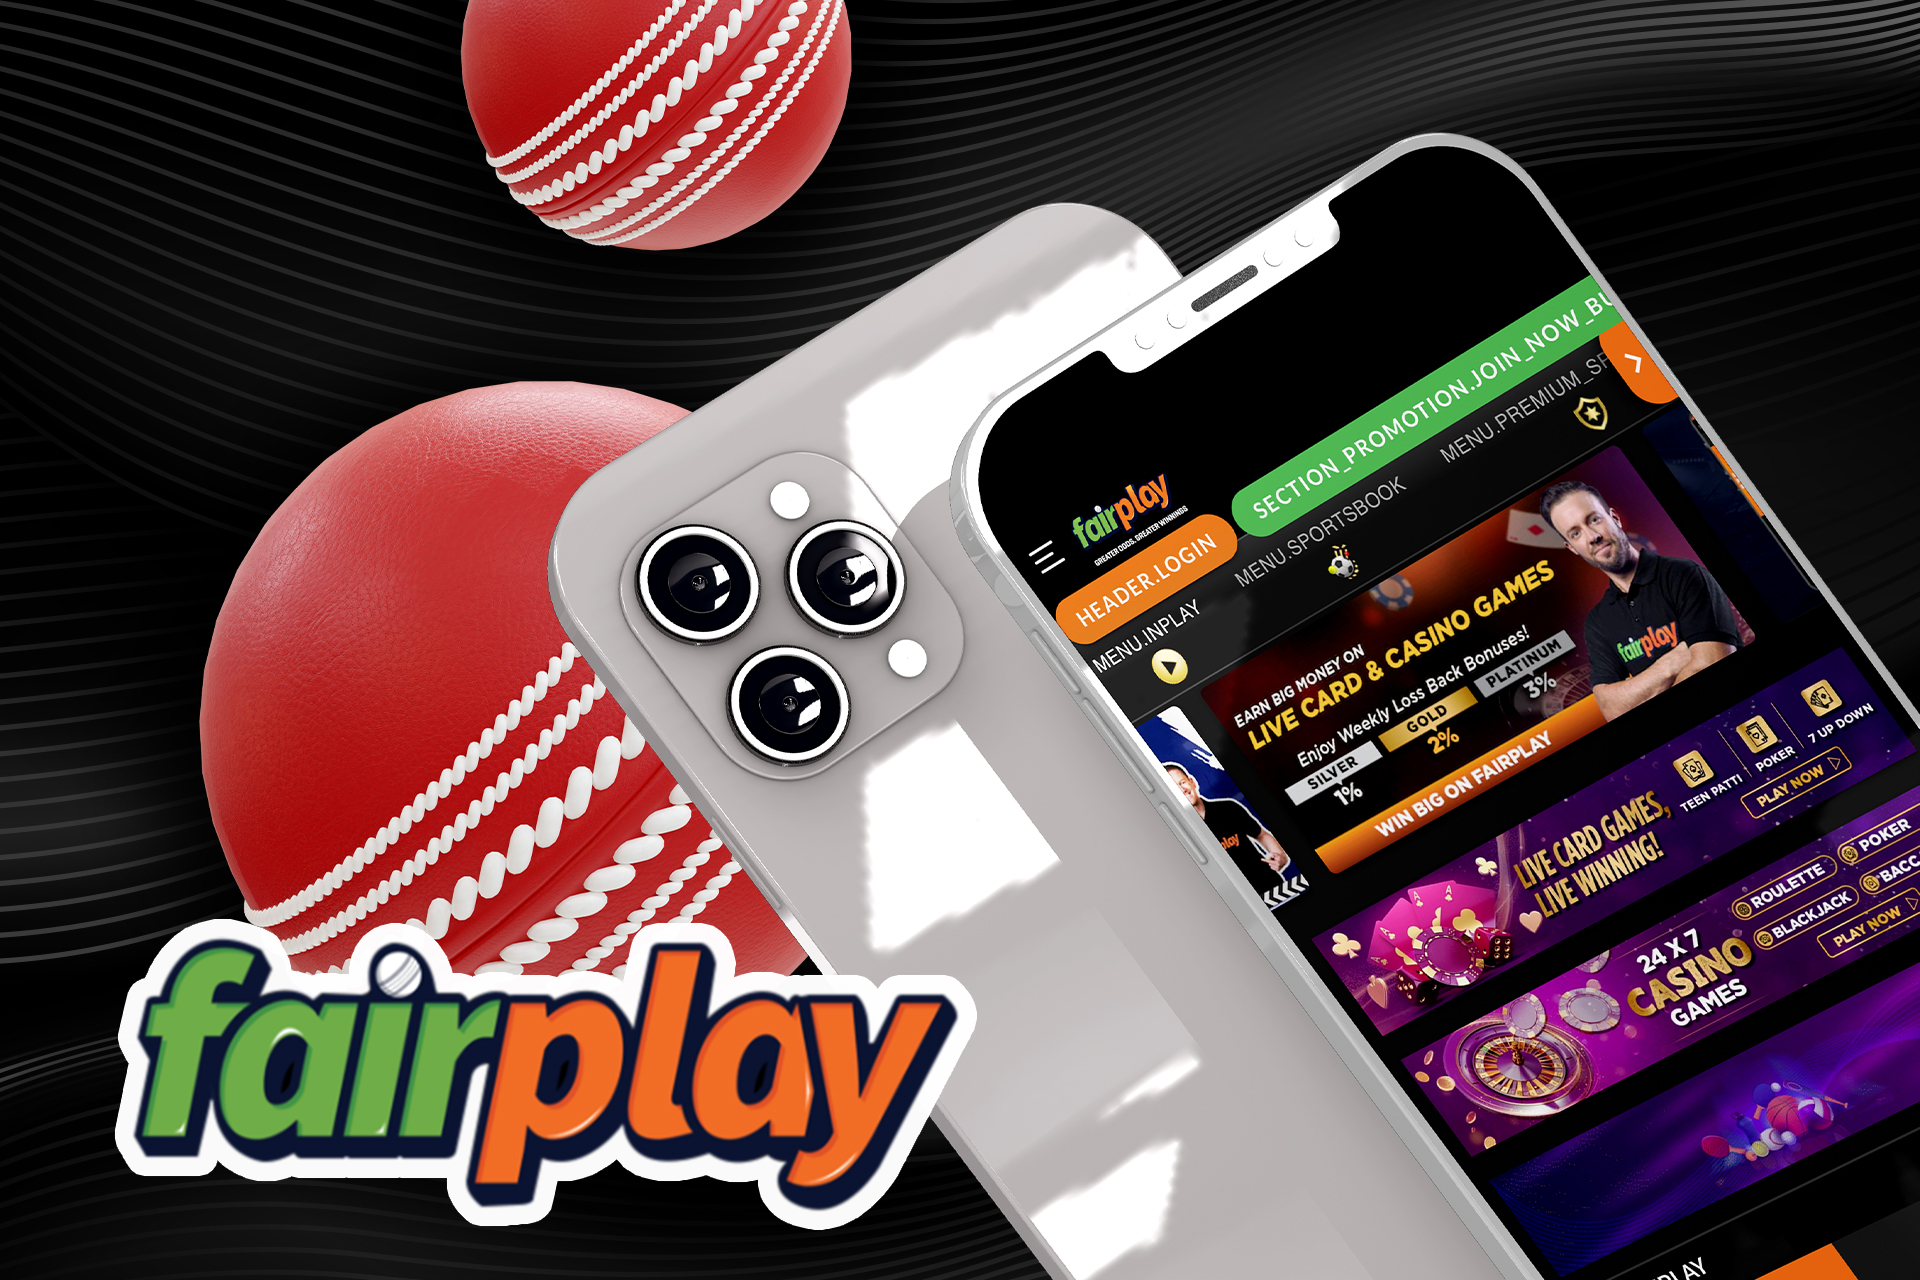 Fairplay app is a great way to bet on the IPL matches on go.